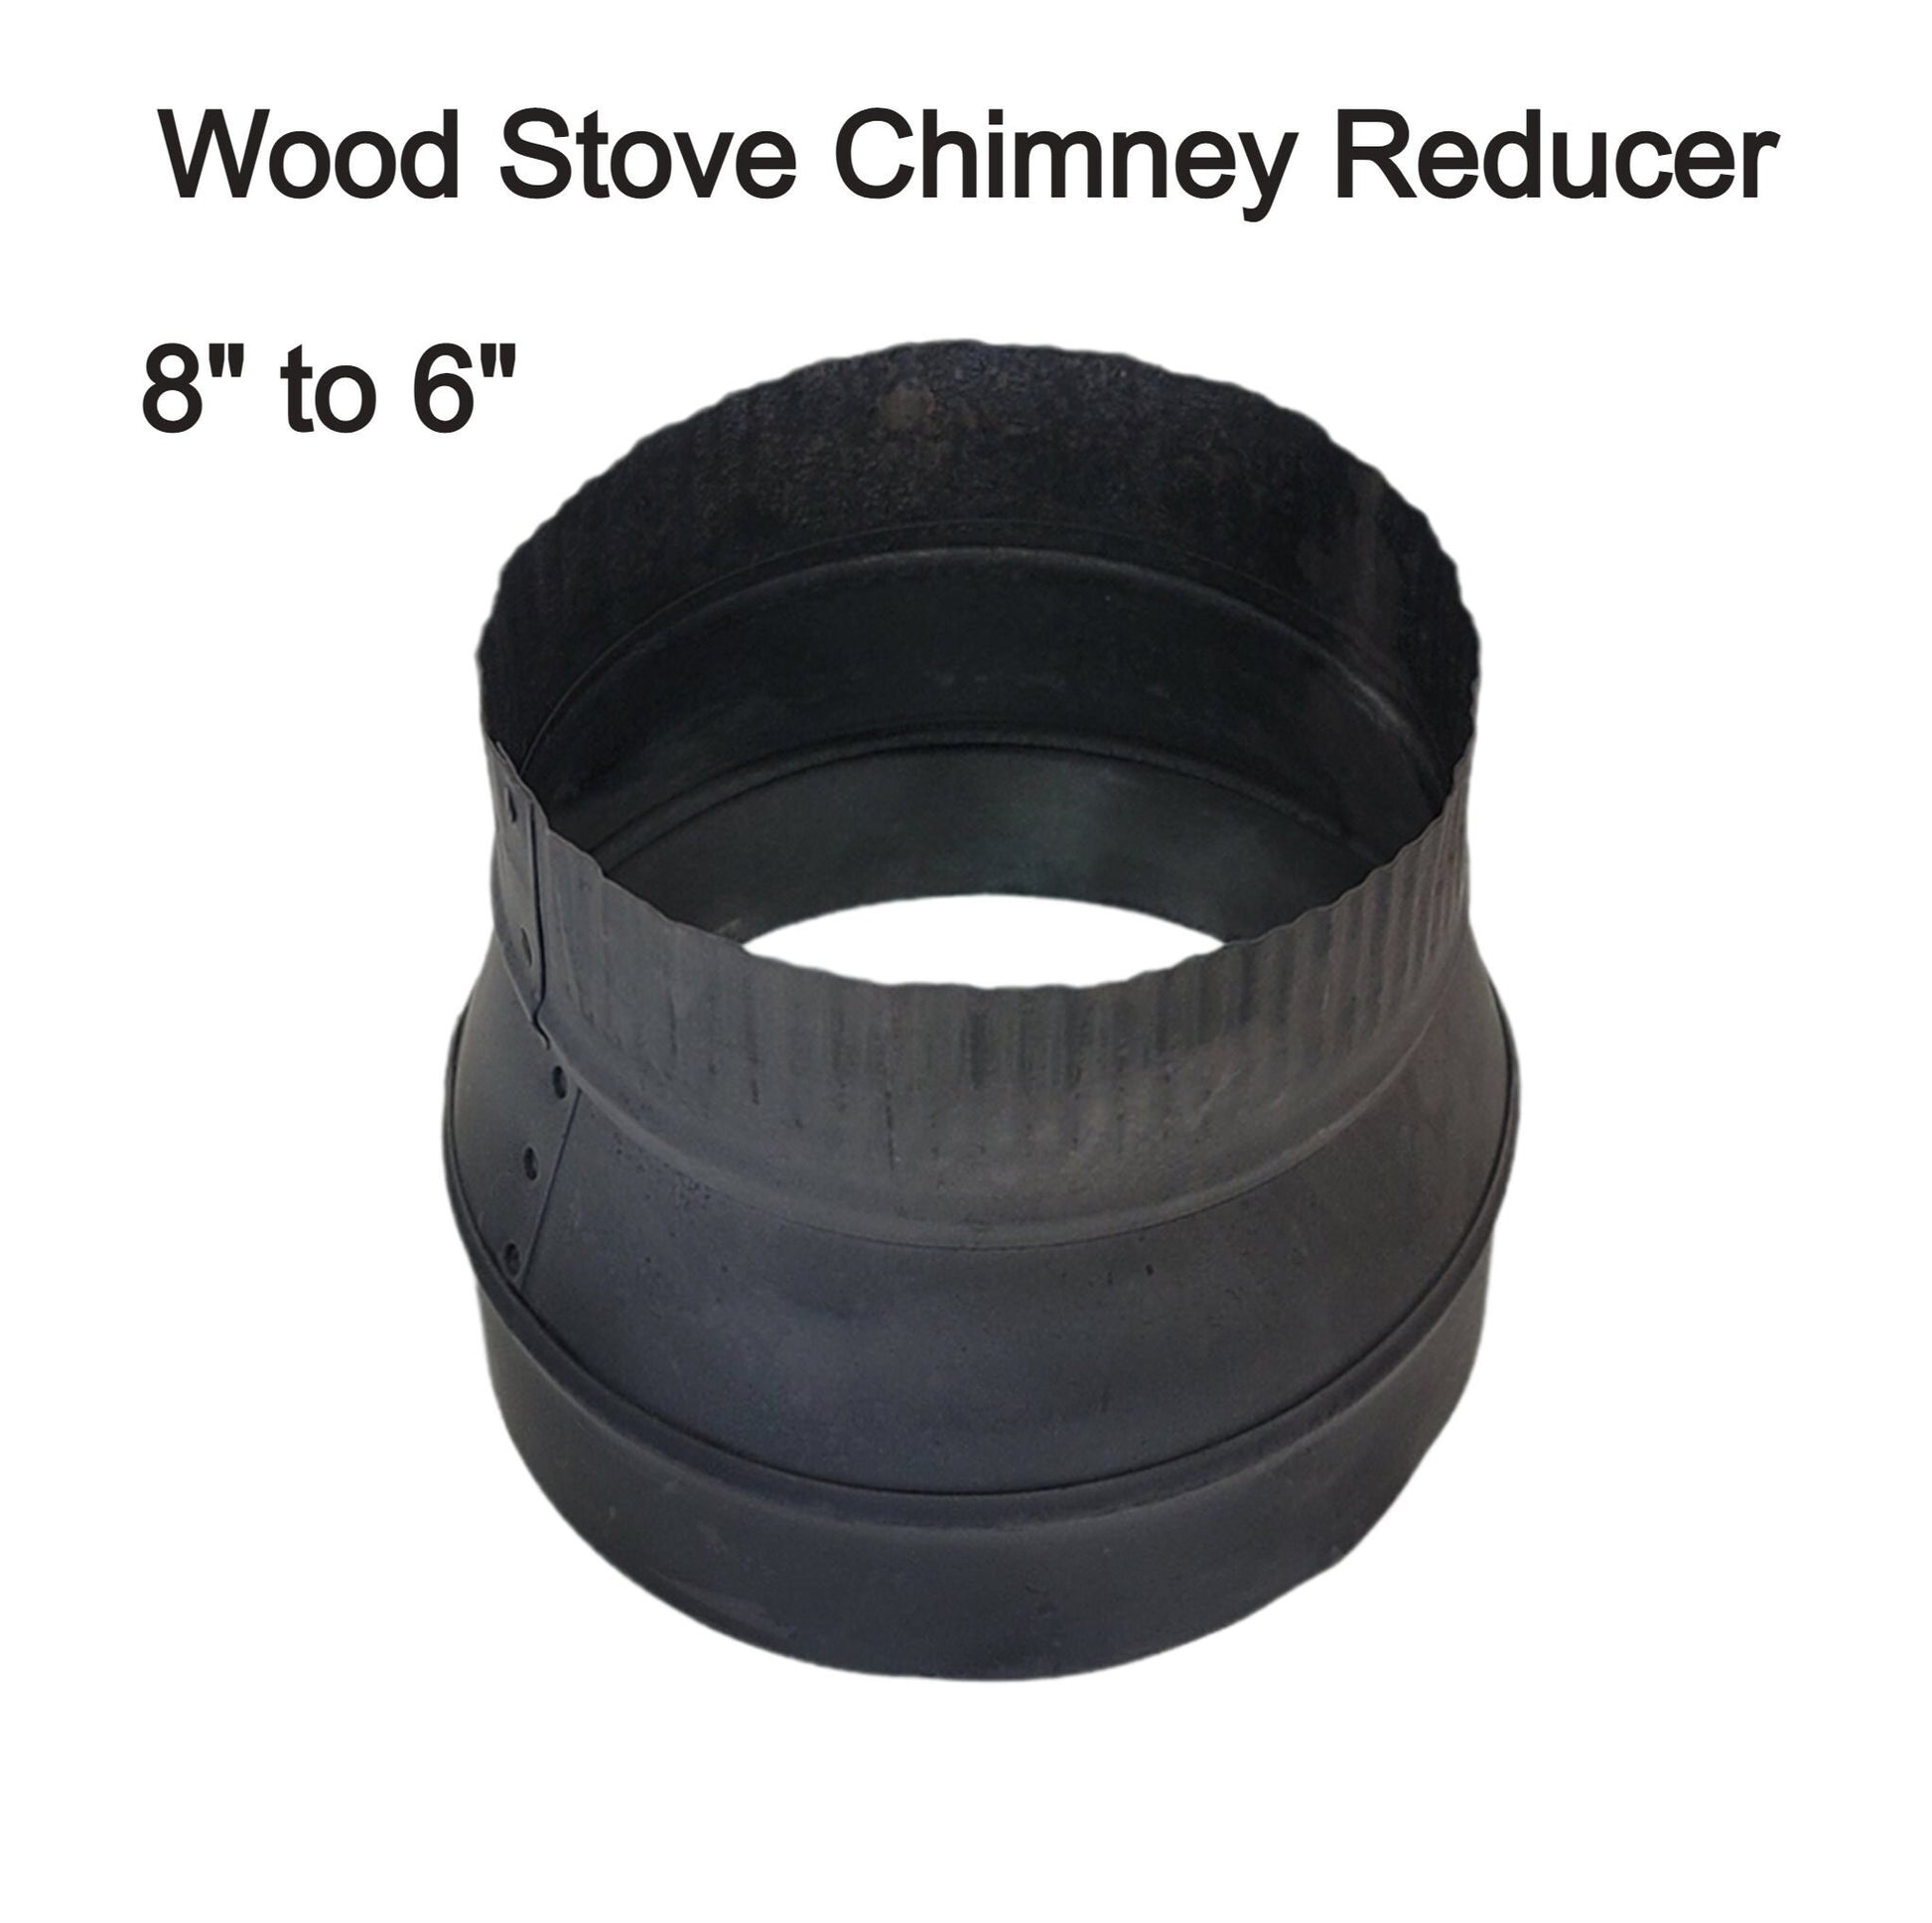 wood stove elbows 6-7-8 inches black wood stove chimney pipe elbows